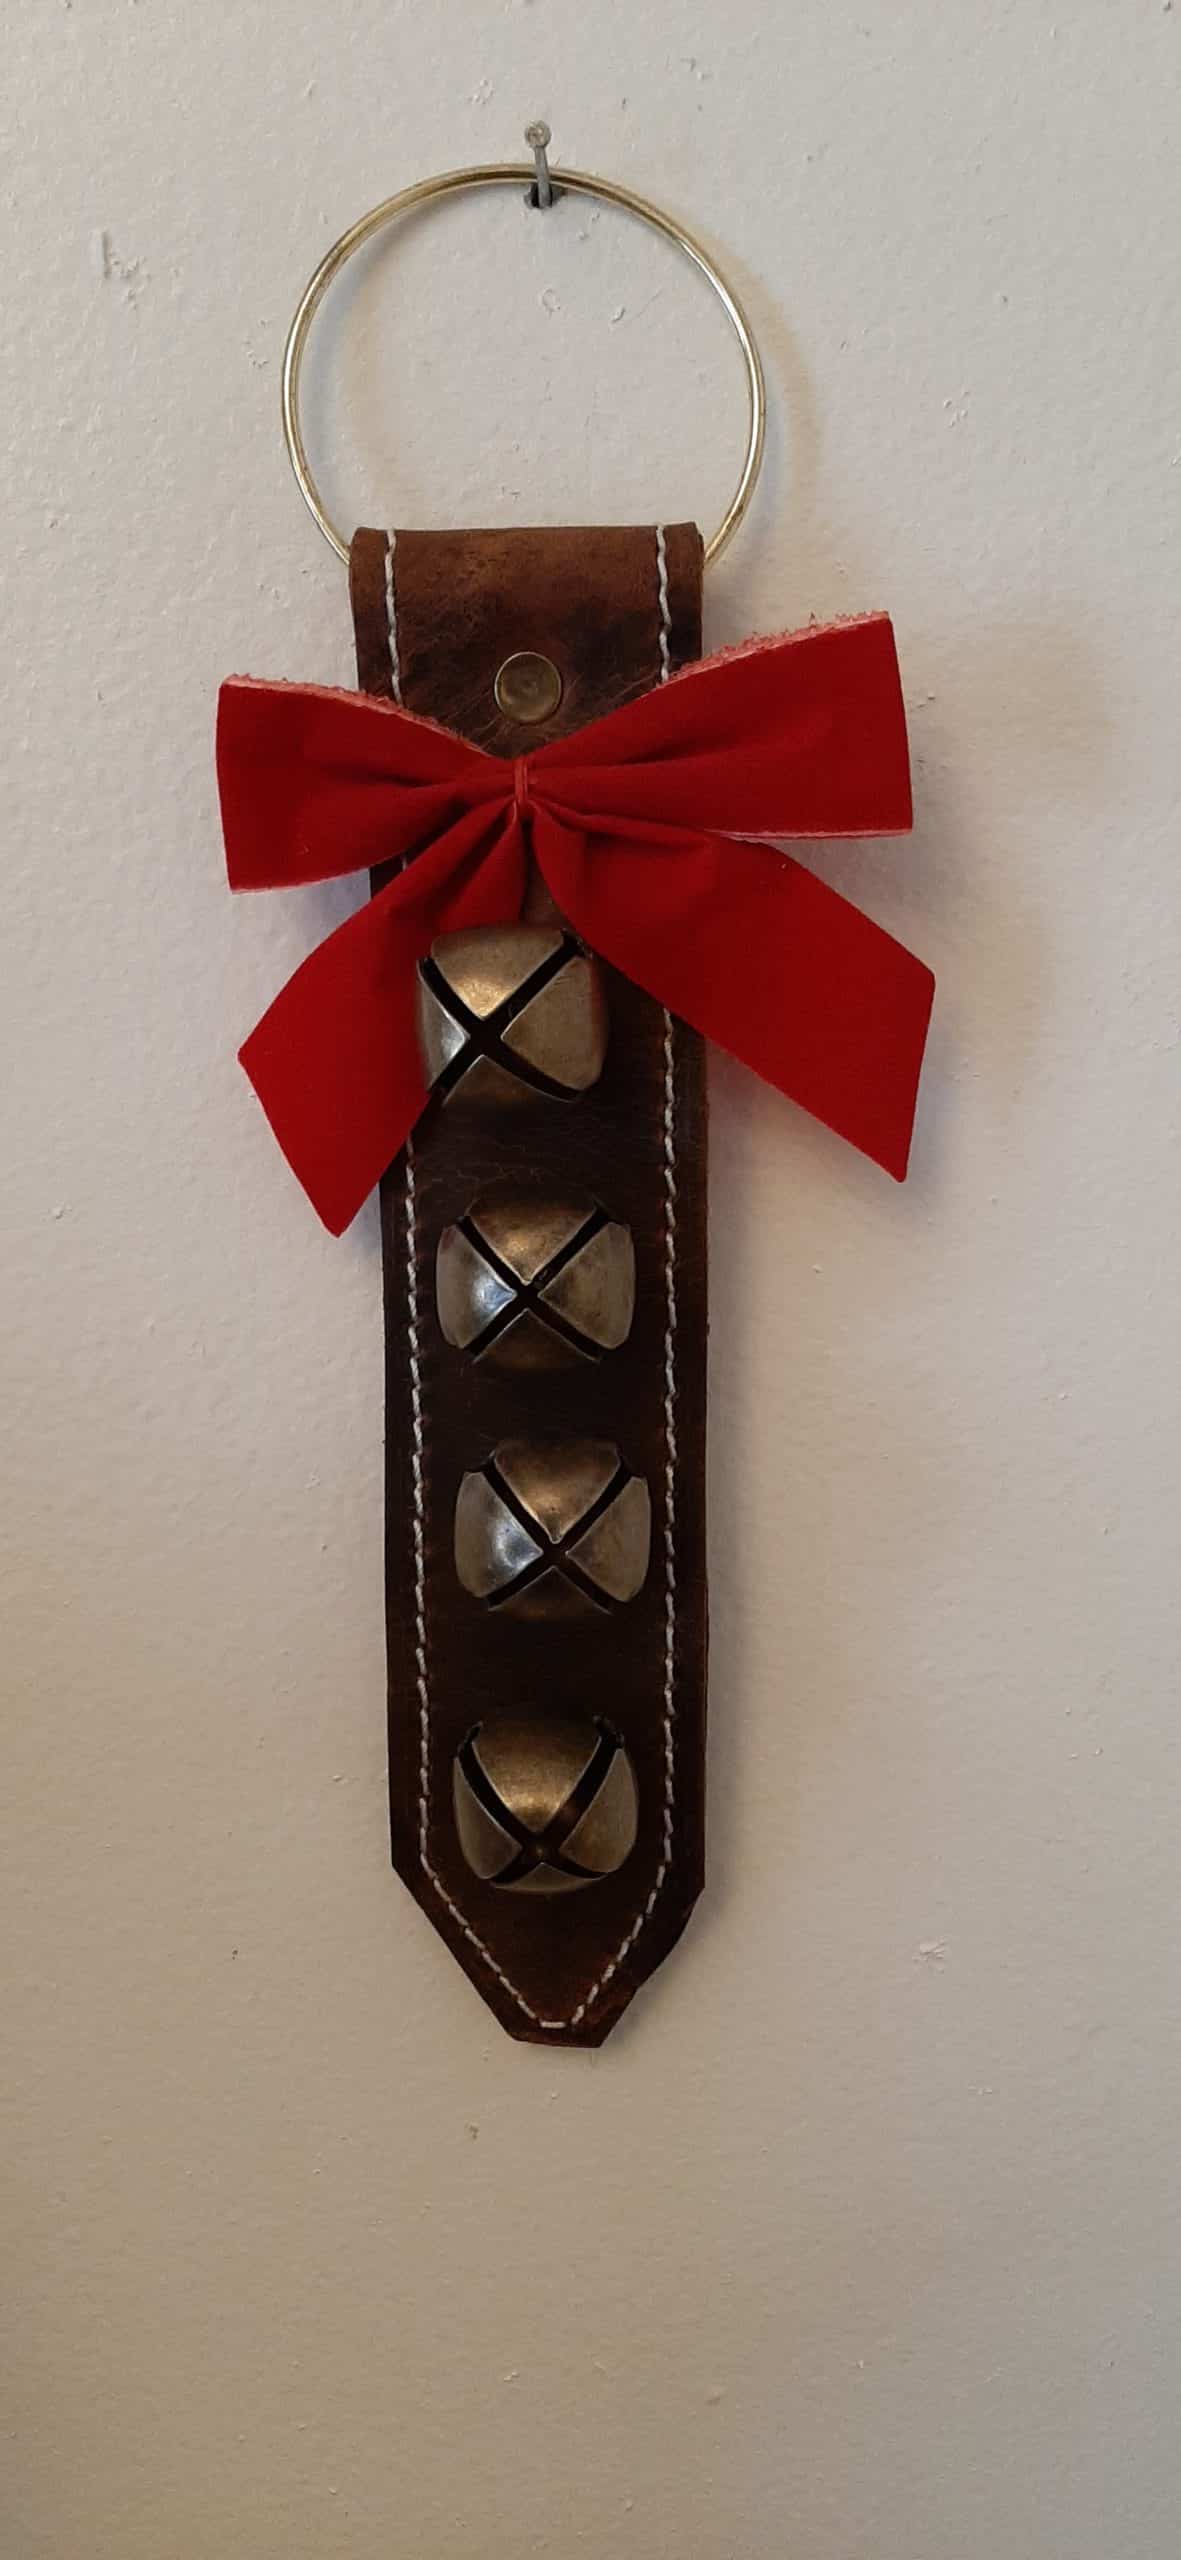 Door hanger with 4 large brass plated bells - brown leather